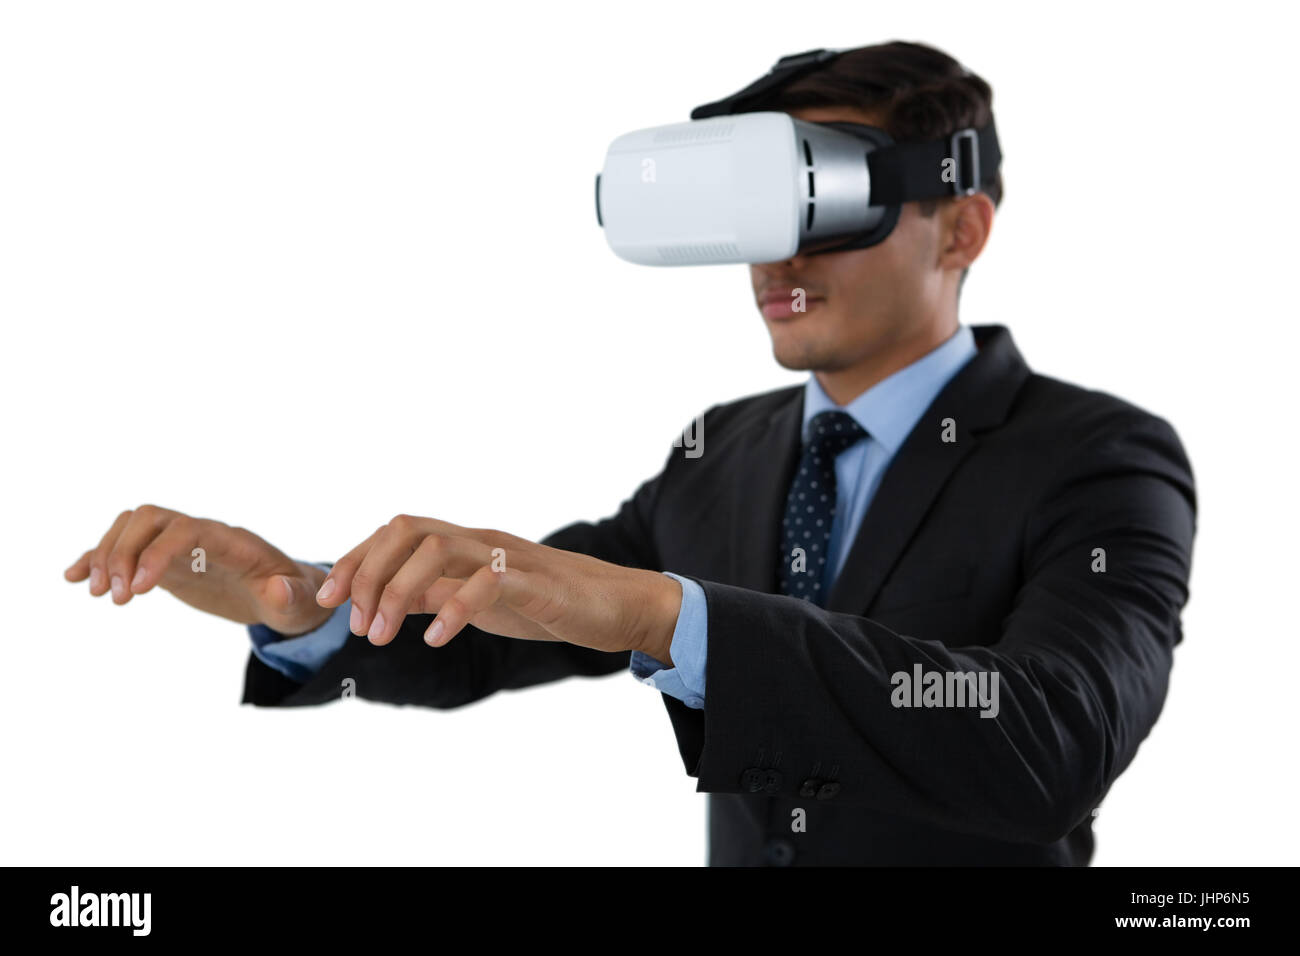 Young businessman gesturing while wearing vr glasses against white background Stock Photo